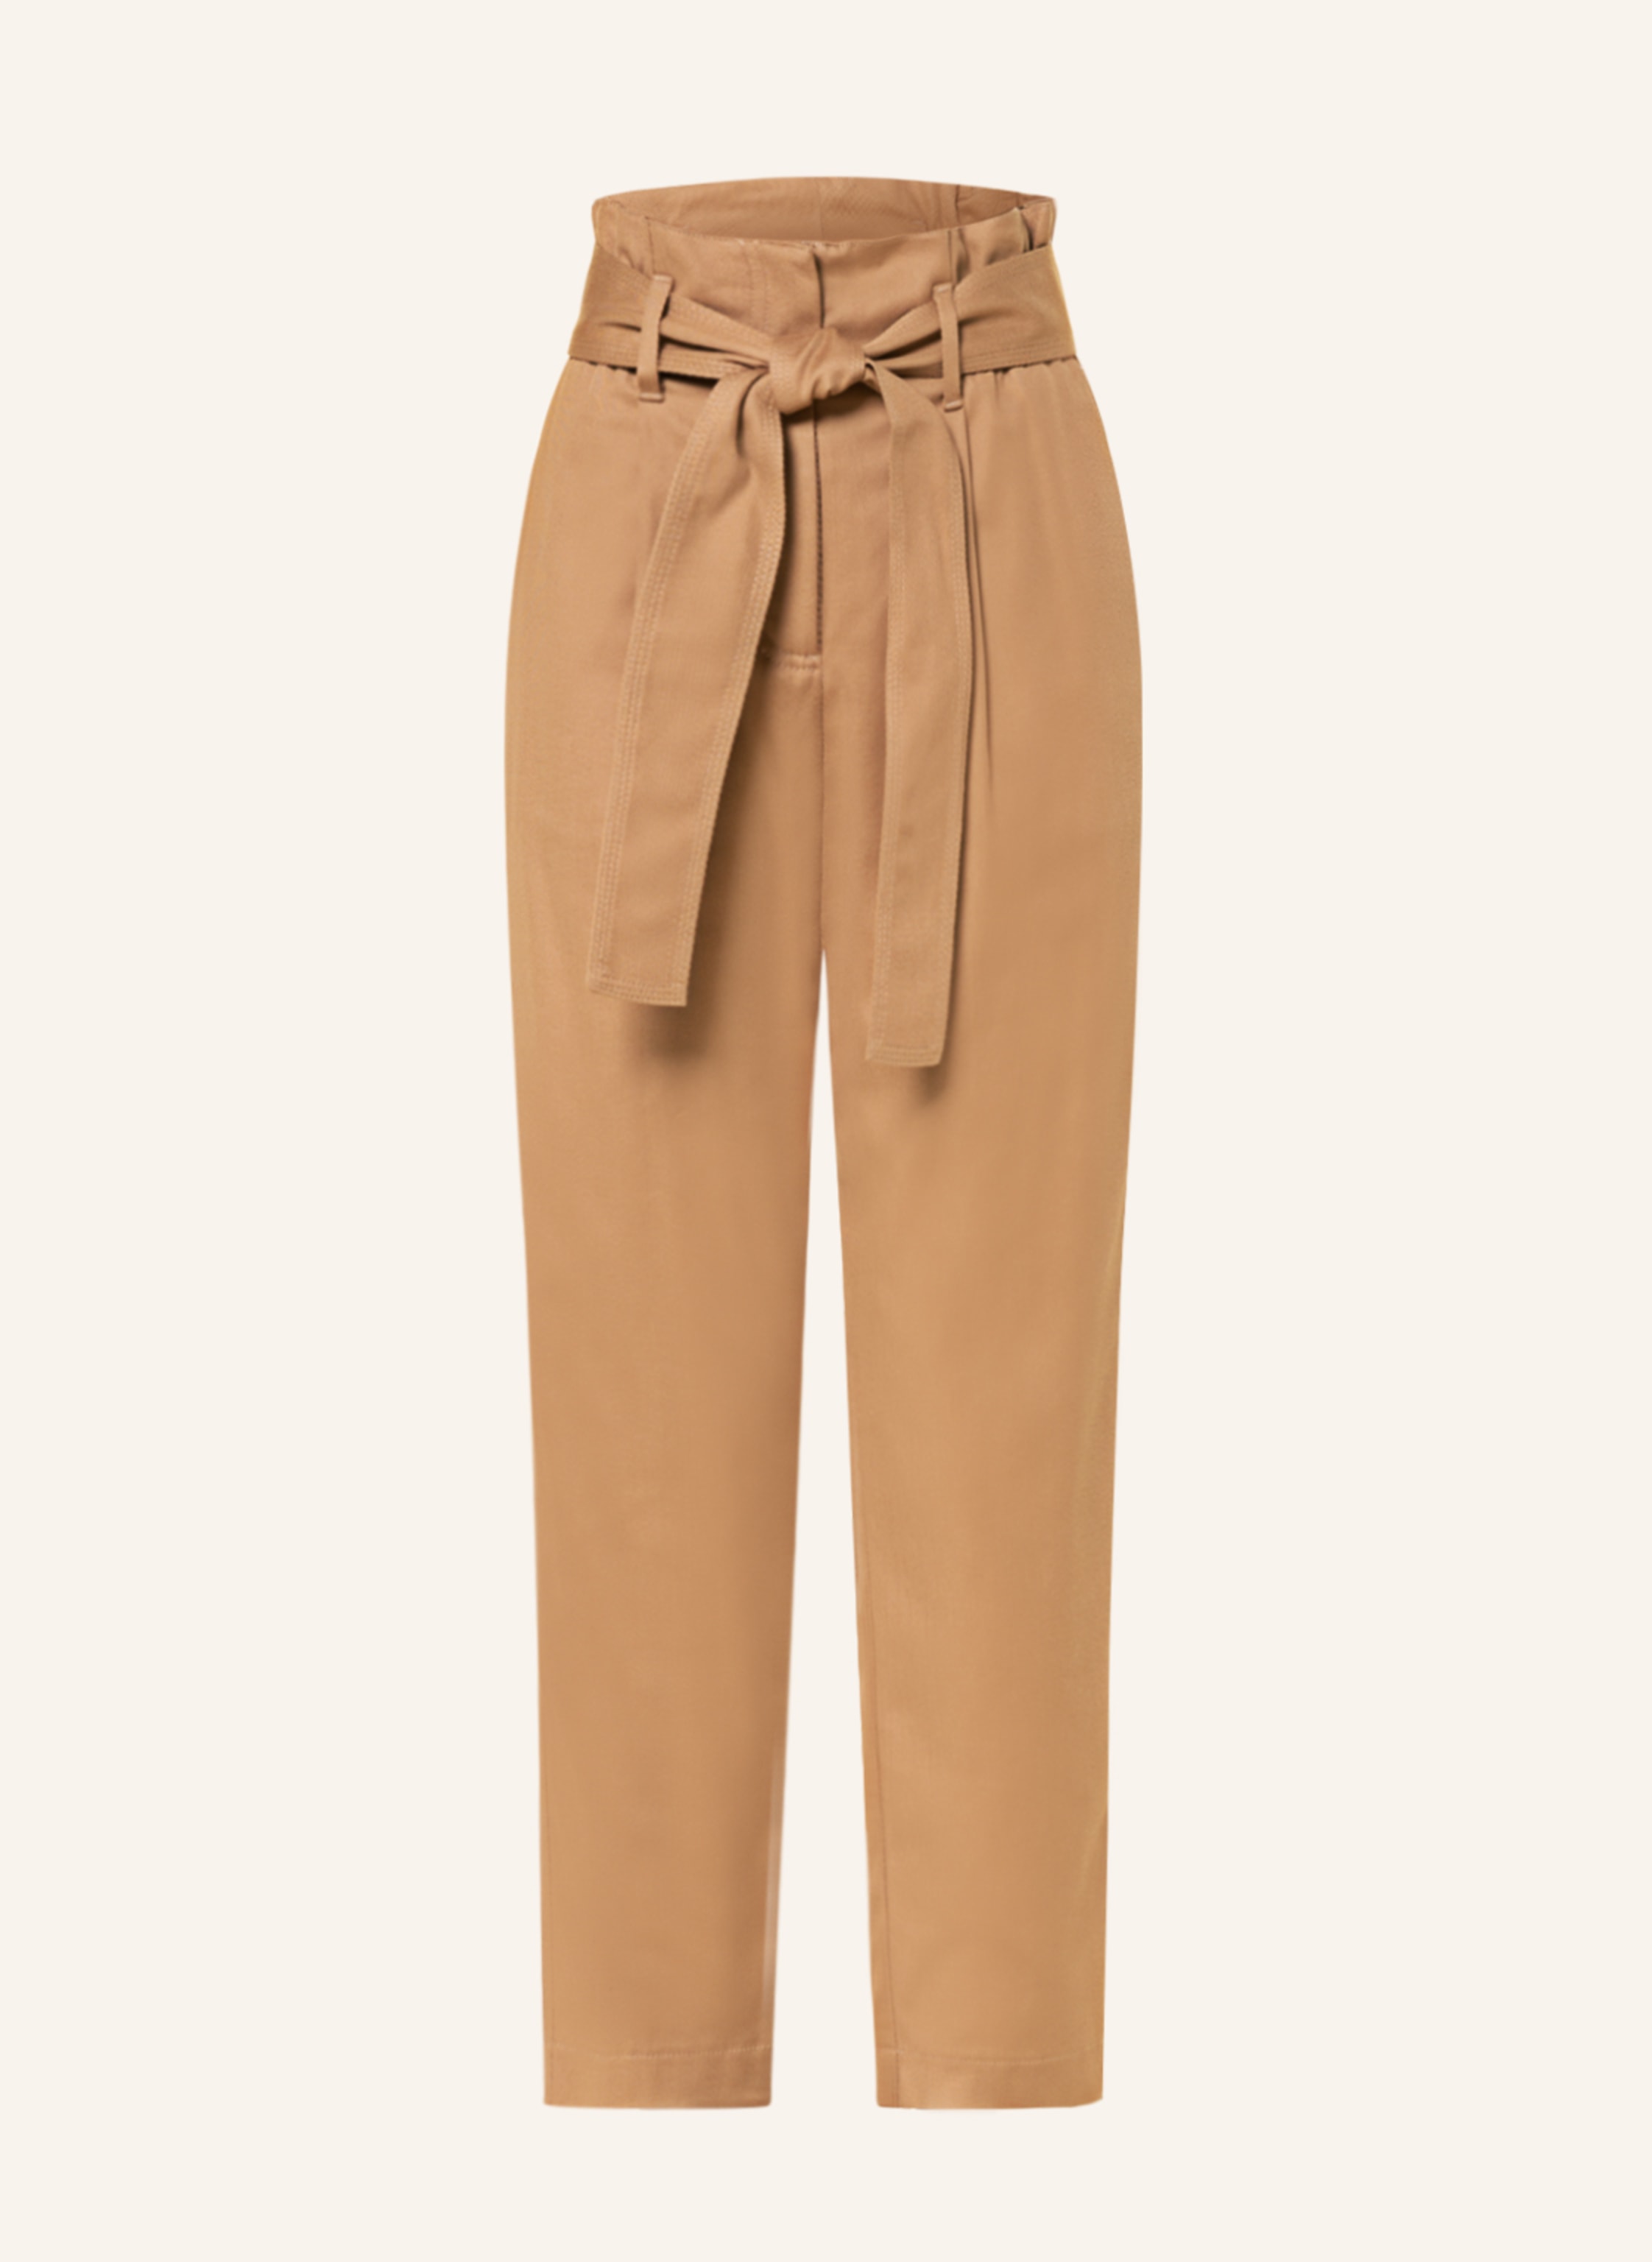 ZARA Baggy Paperbag Pants - beige, Women's Fashion, Bottoms, Jeans on  Carousell